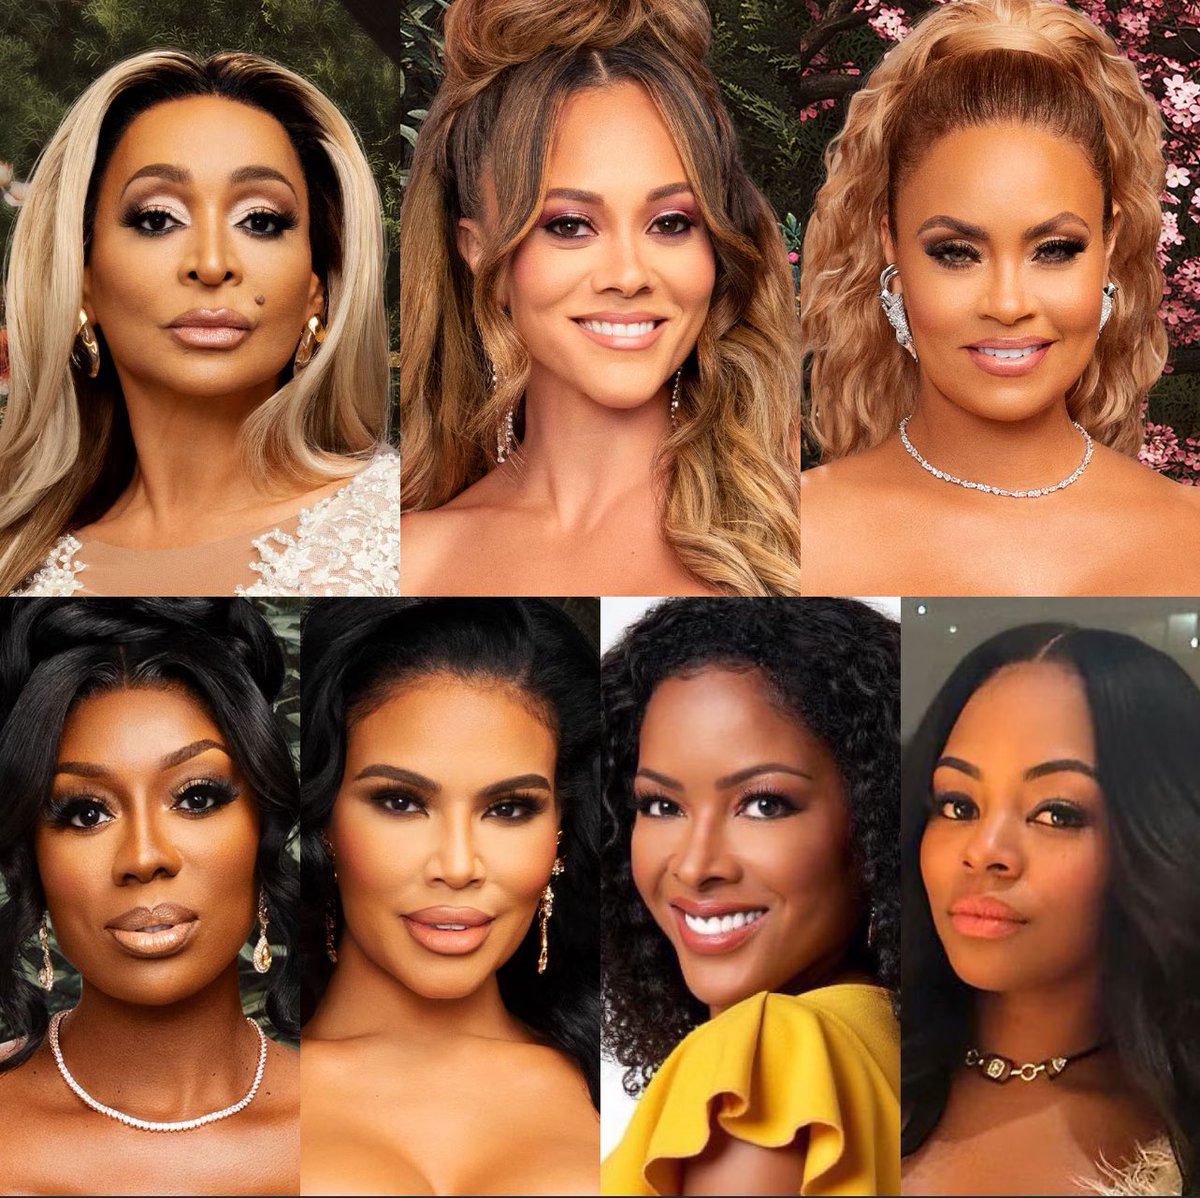 What are your thoughts on the #RHOP Season 9 cast? Filming begins this week and there will be a second newbie! 🌸